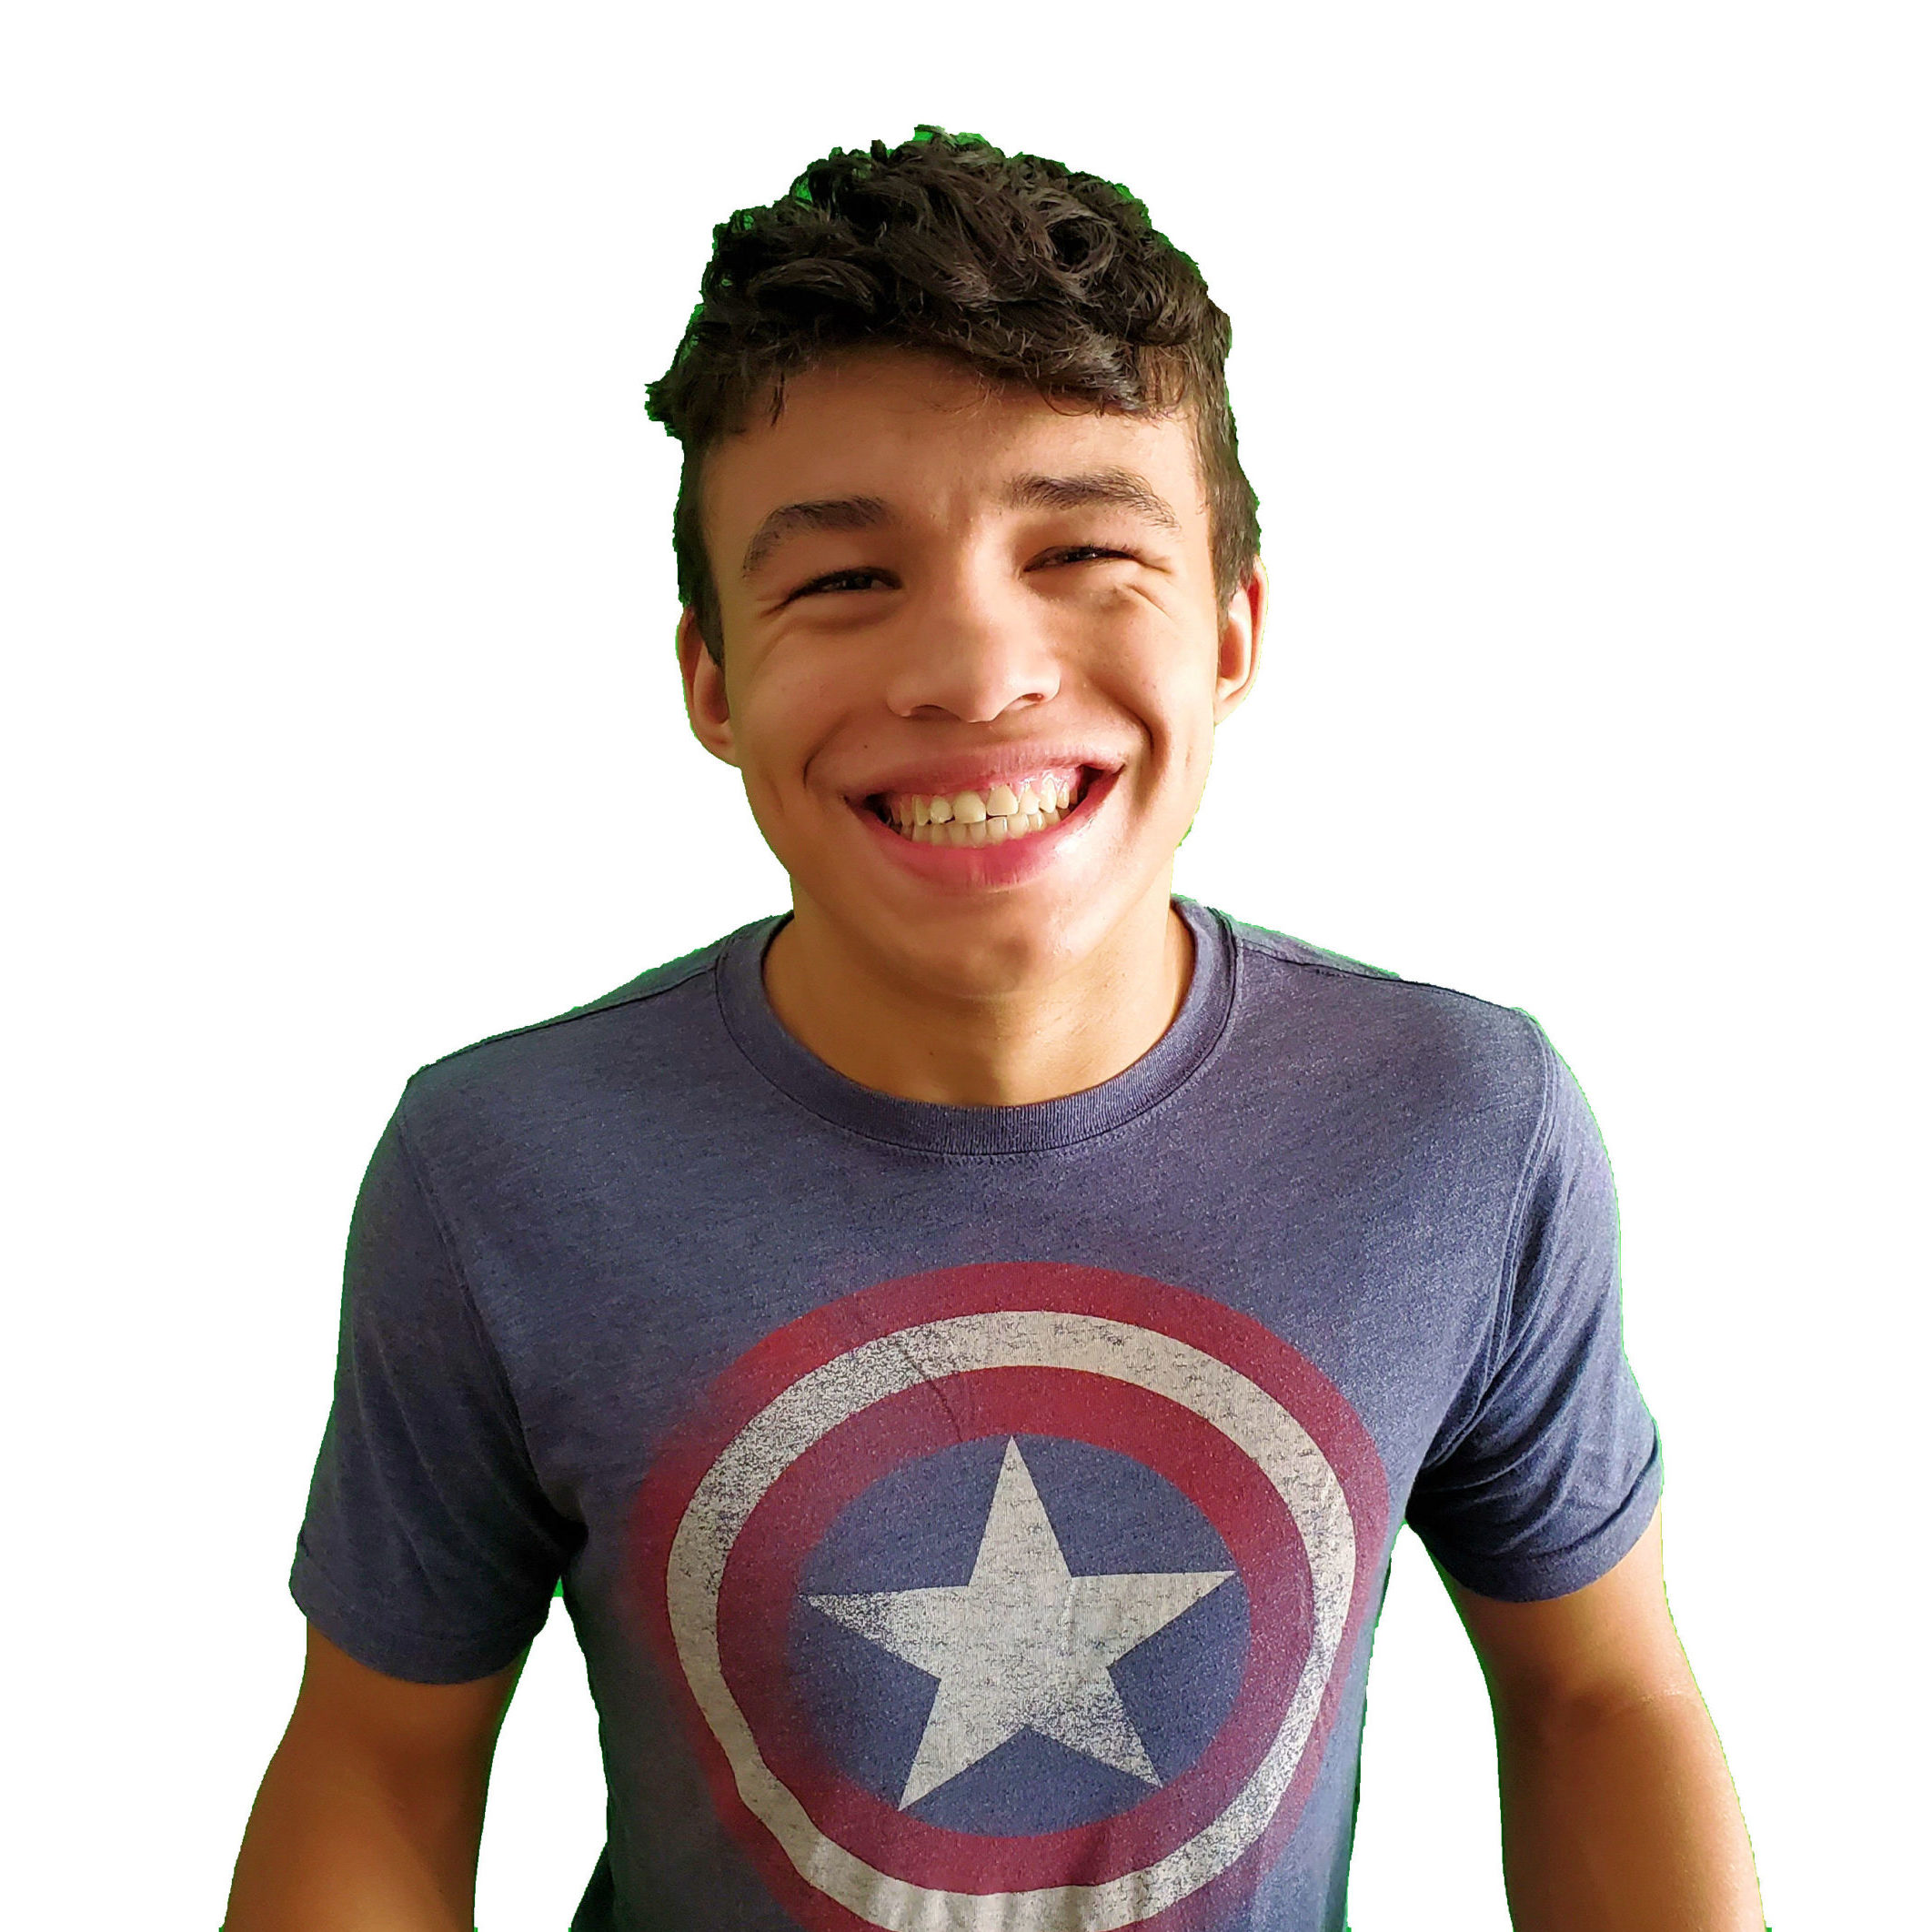 Alexander smiling at the camera wearing a Captain America T-shirt.